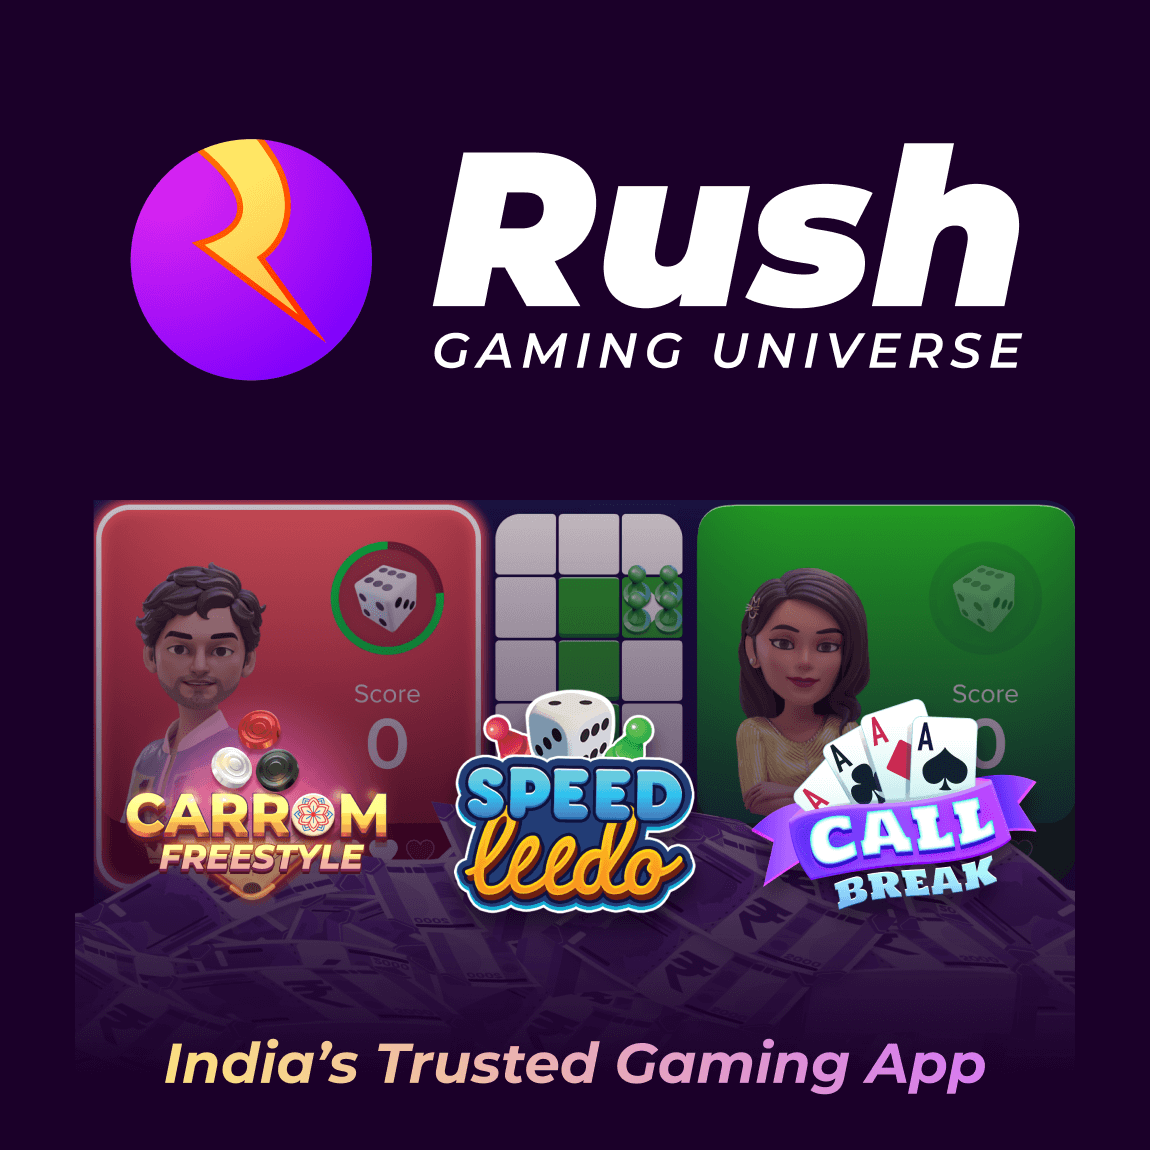 Play Ludo Game Online ✓ and Earn Real Money Everyday